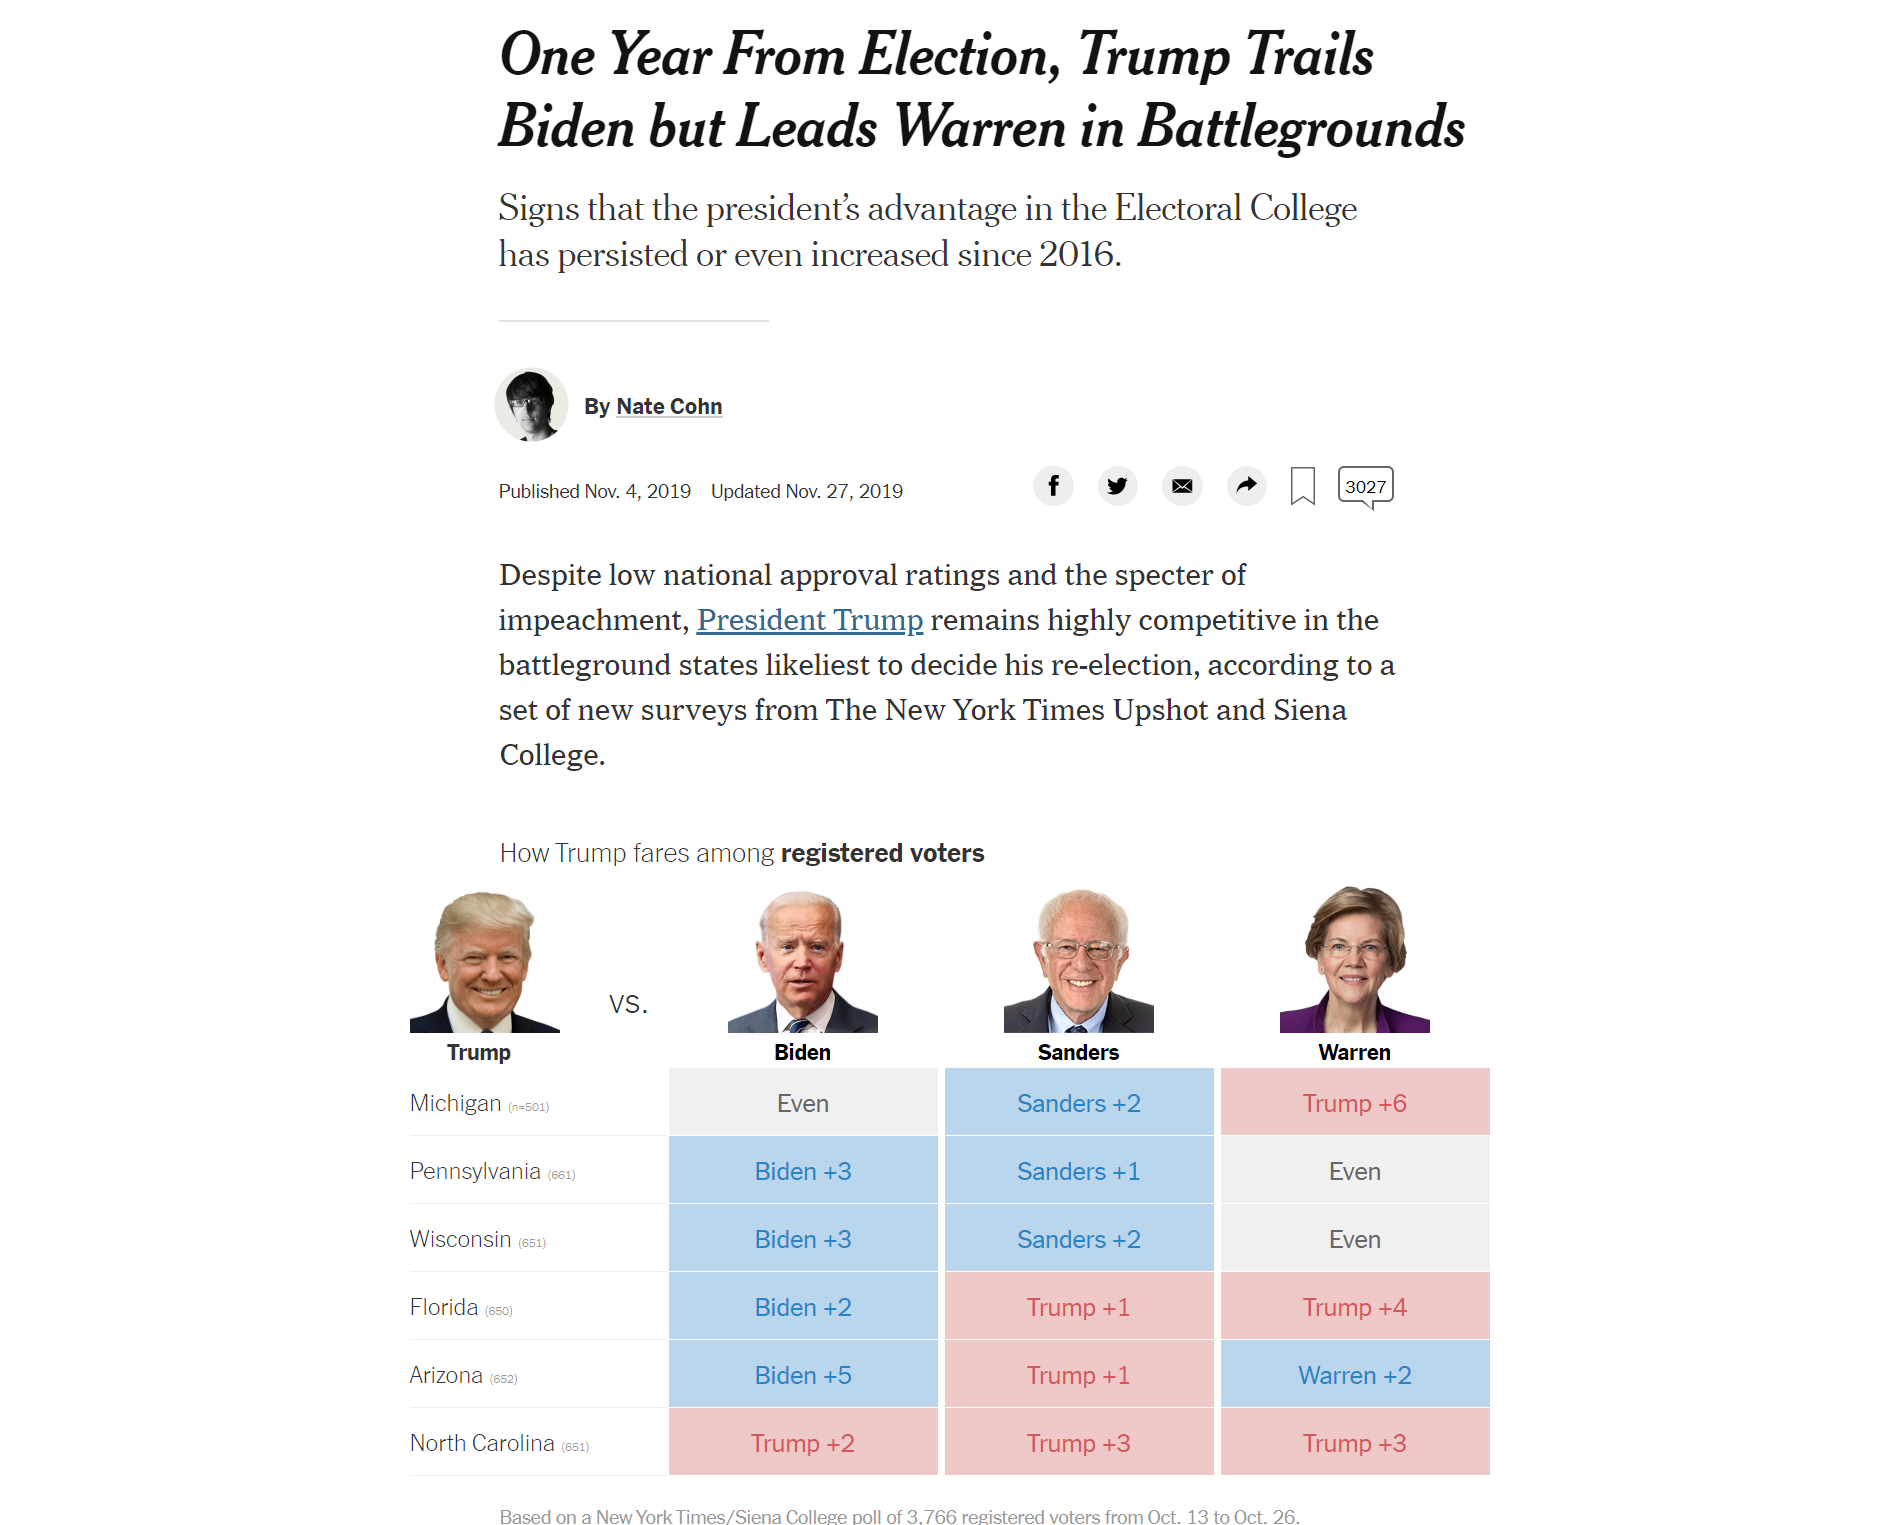 11/27/19, The New York Times